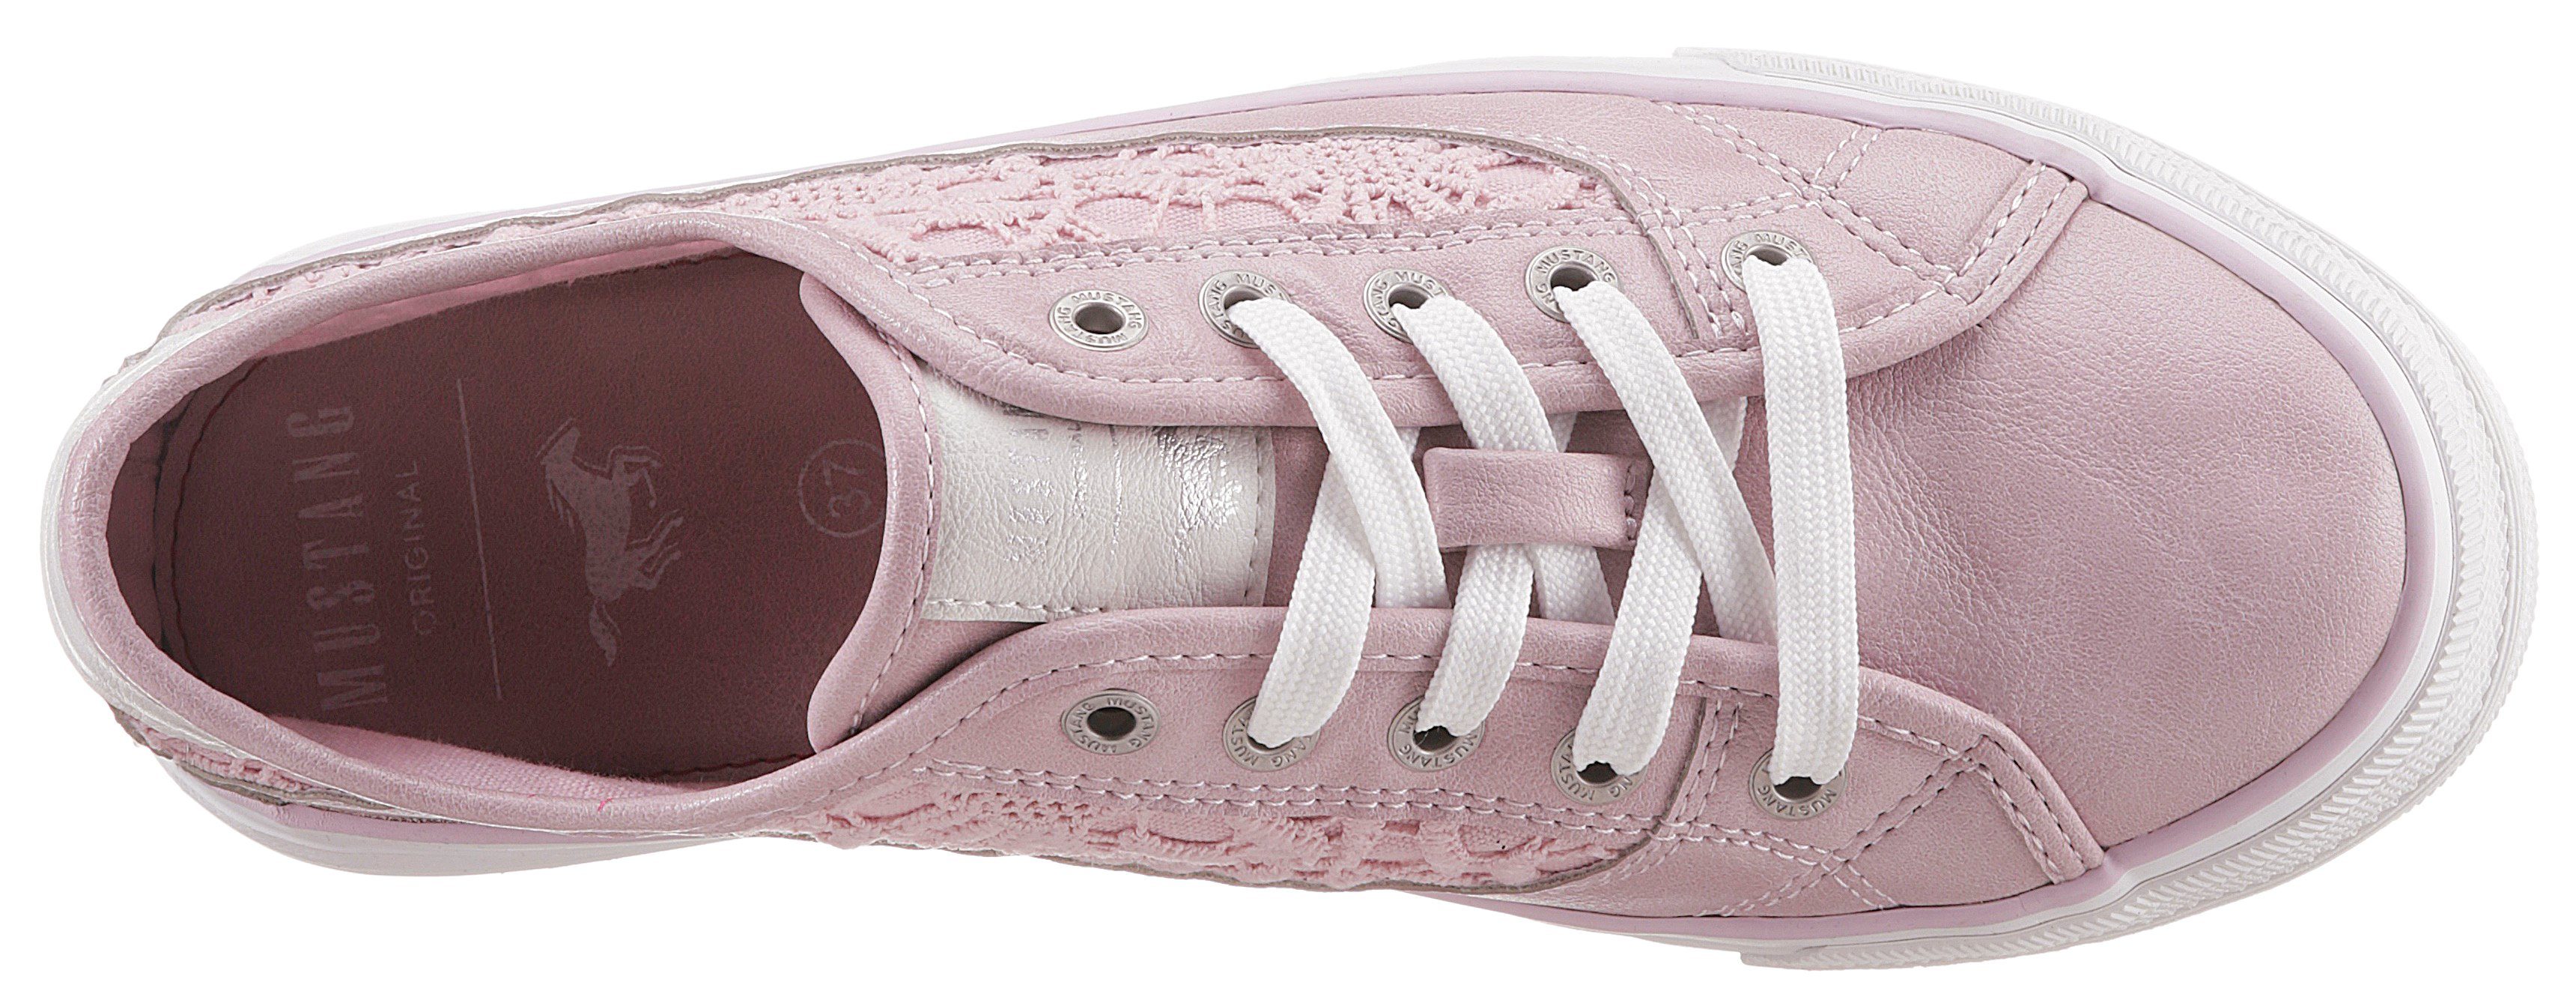 Mustang Shoes Sneaker mit Spitze rosa